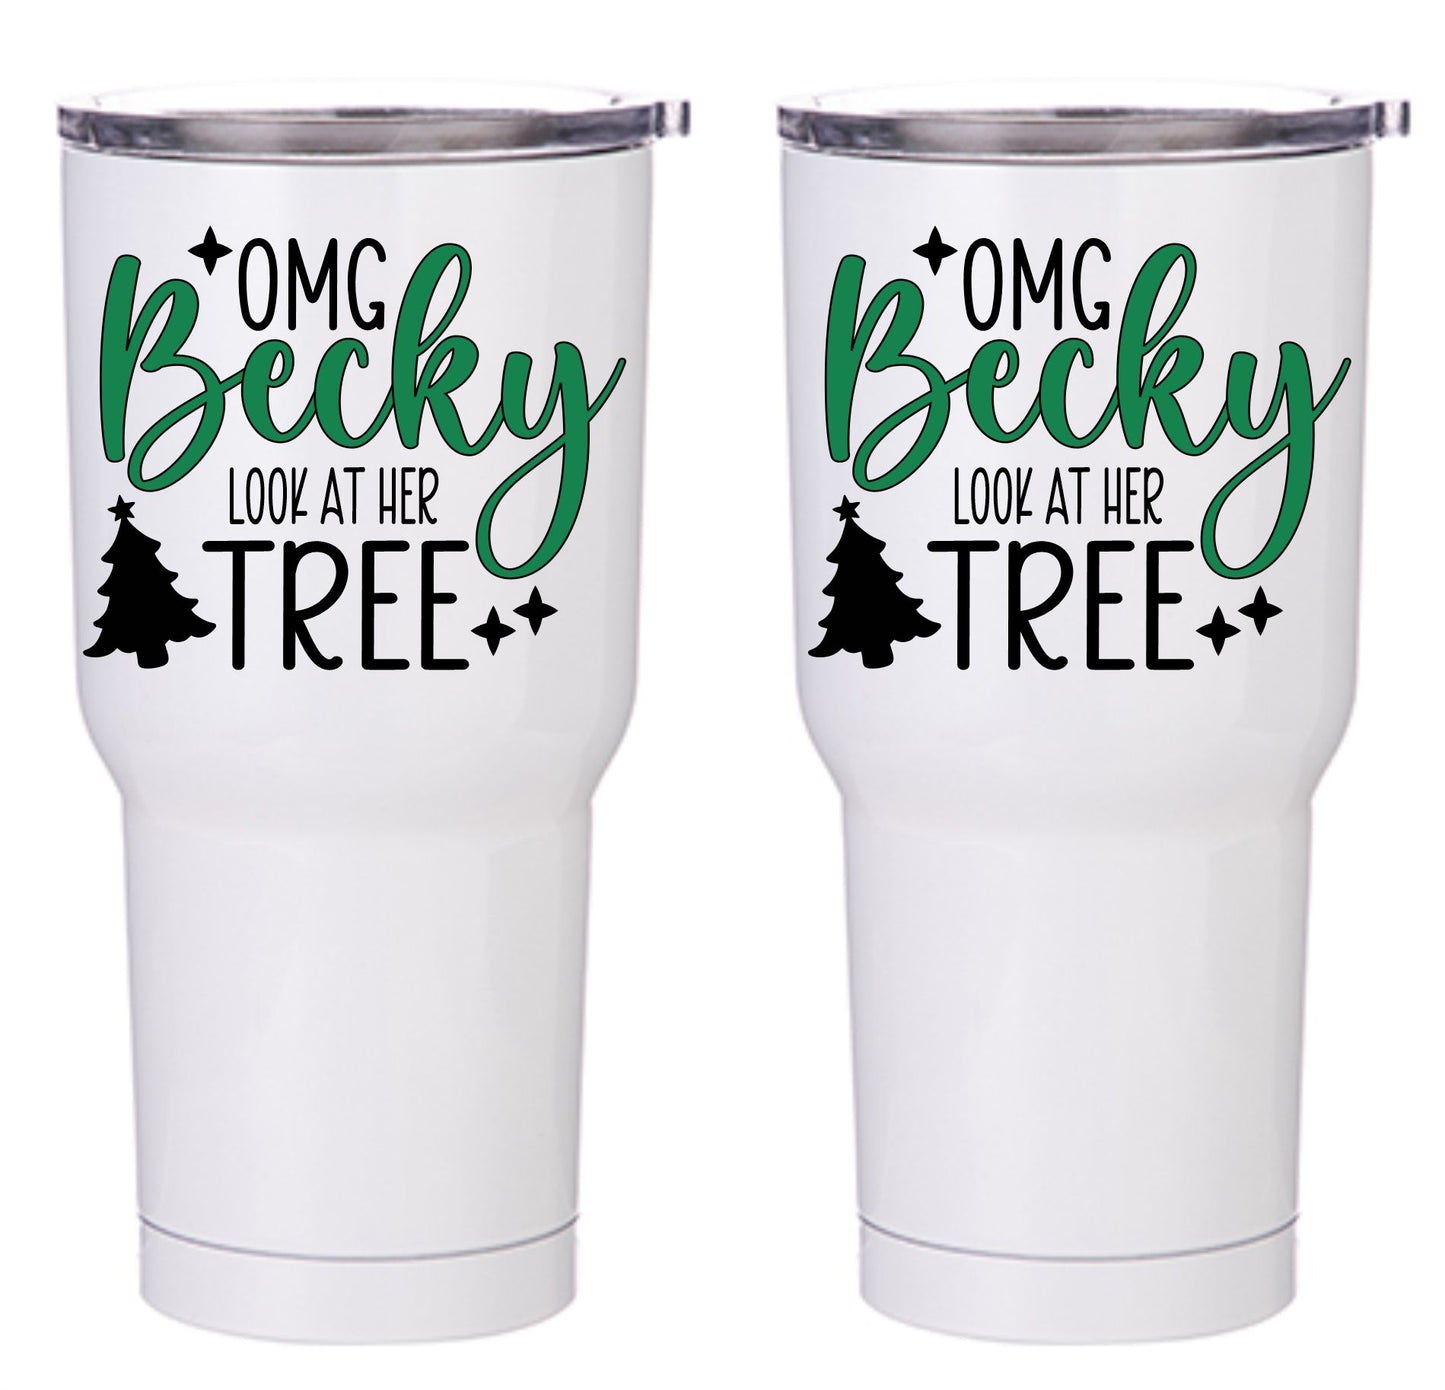 OMG Becky look at her Tree 30oz tumbler